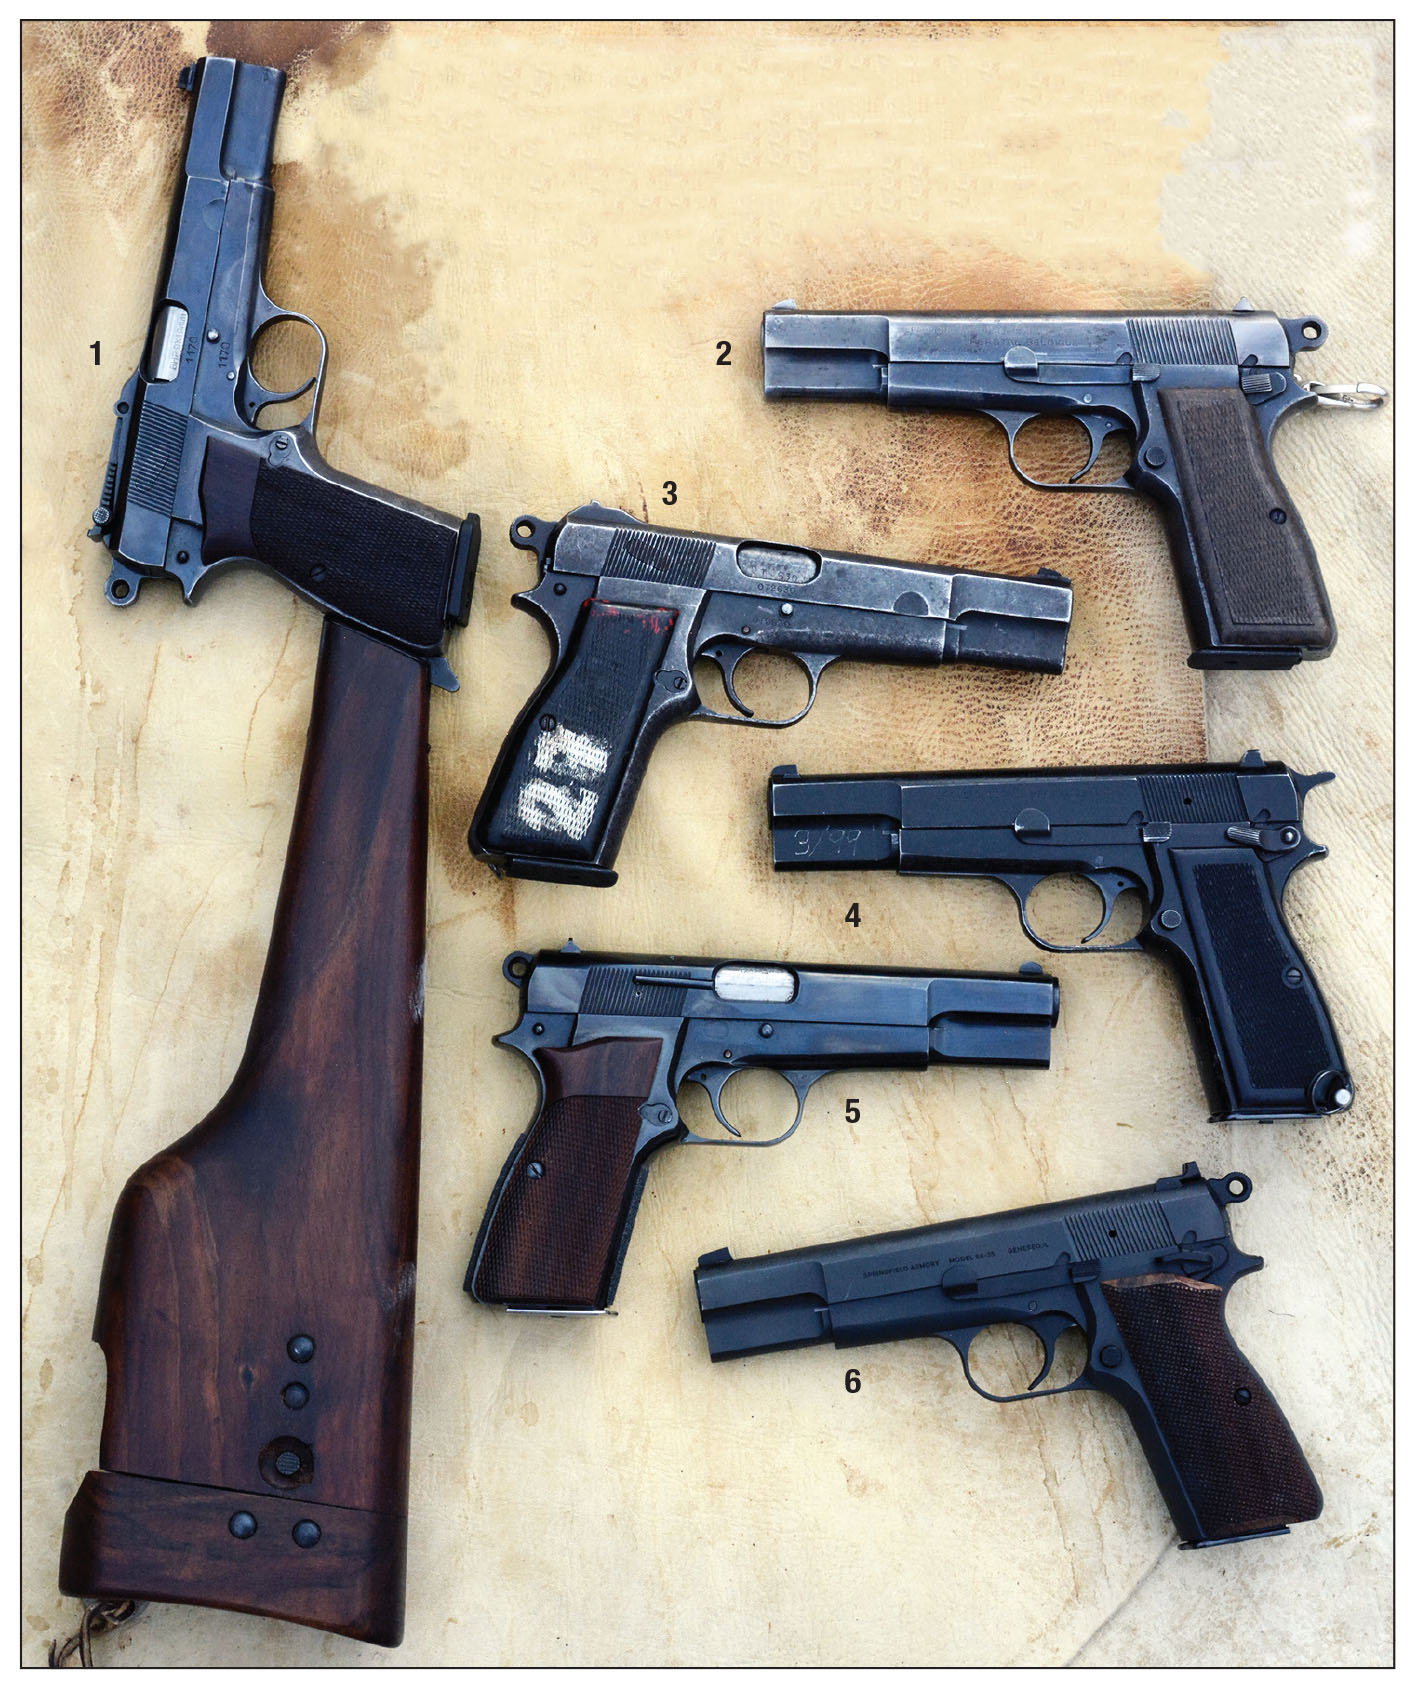 The (1) 1935 era 1st year production FN produced for Belgium Military with a shoulder stock, (2) a 1943 FN produced German Nazi issue, (3) a 1944 Inglis manufacture shipped to England for Special Operations Executive, (4) a 1990’s era FN produced MK III issued to Israeli Military, (5) an early 1970’s FN commercial and (6) a 2023 Springfield Armory SA-35, U.S. produced.